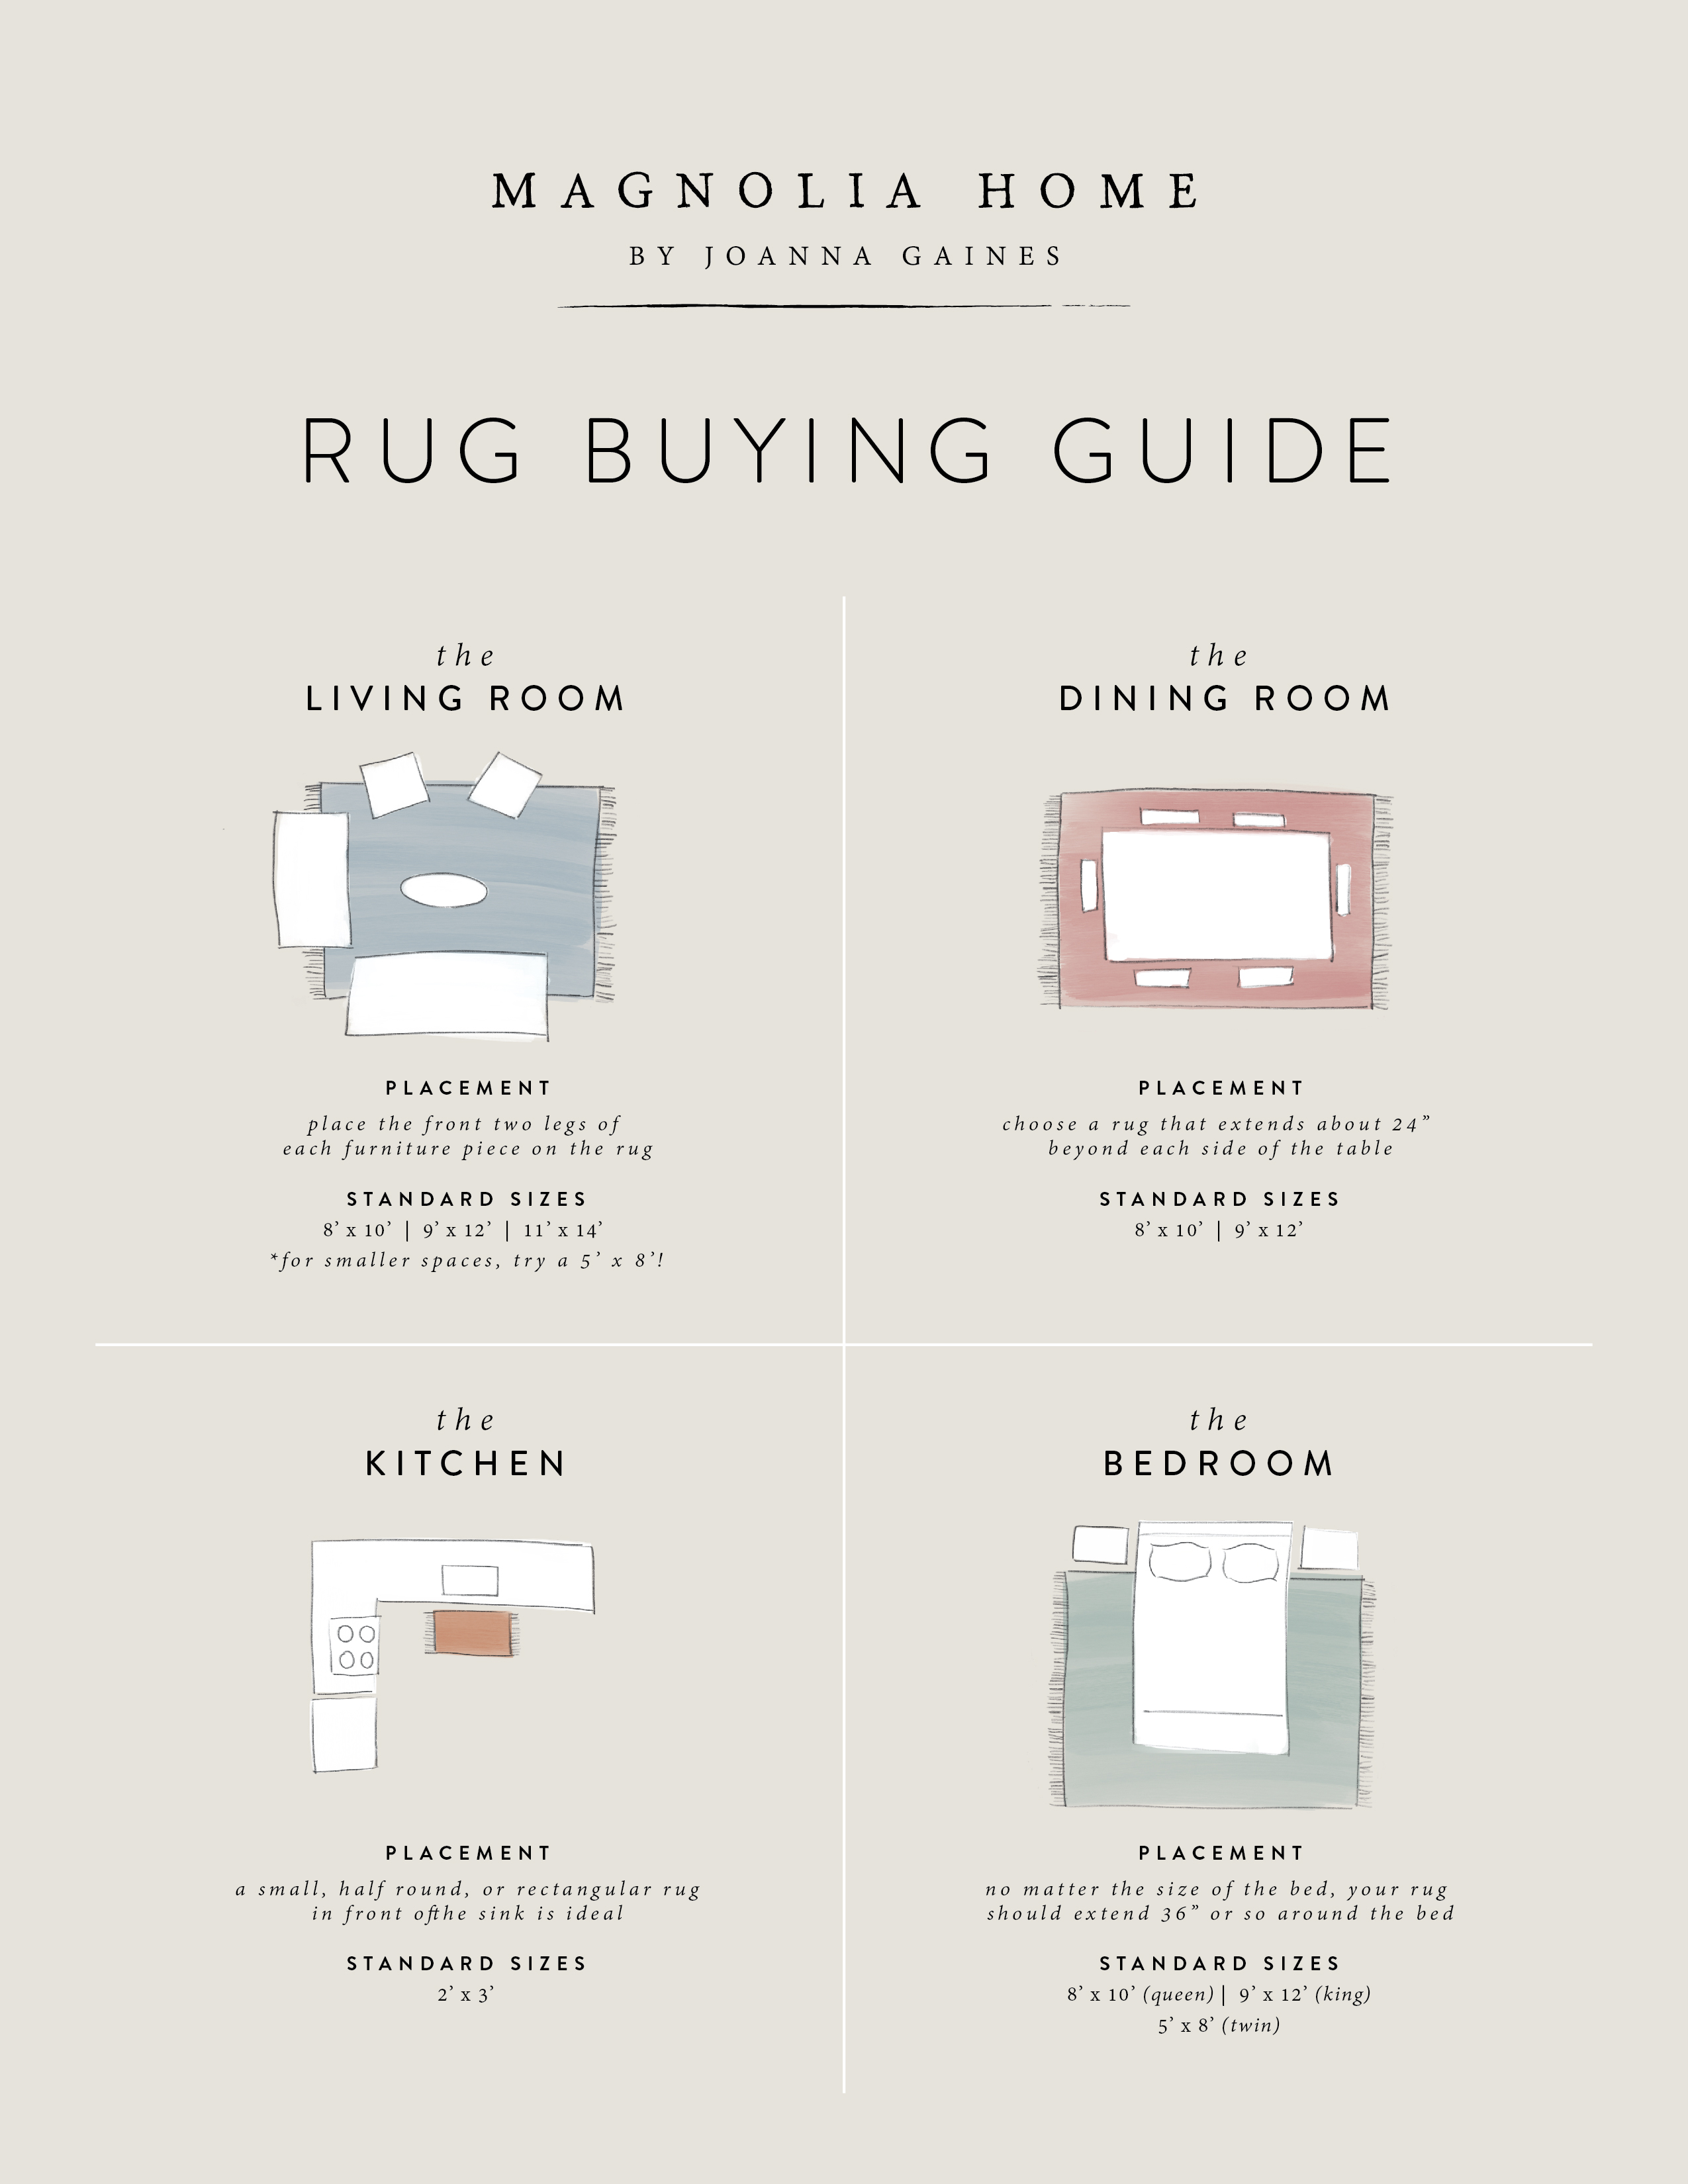 What are Standard Rug Sizes?